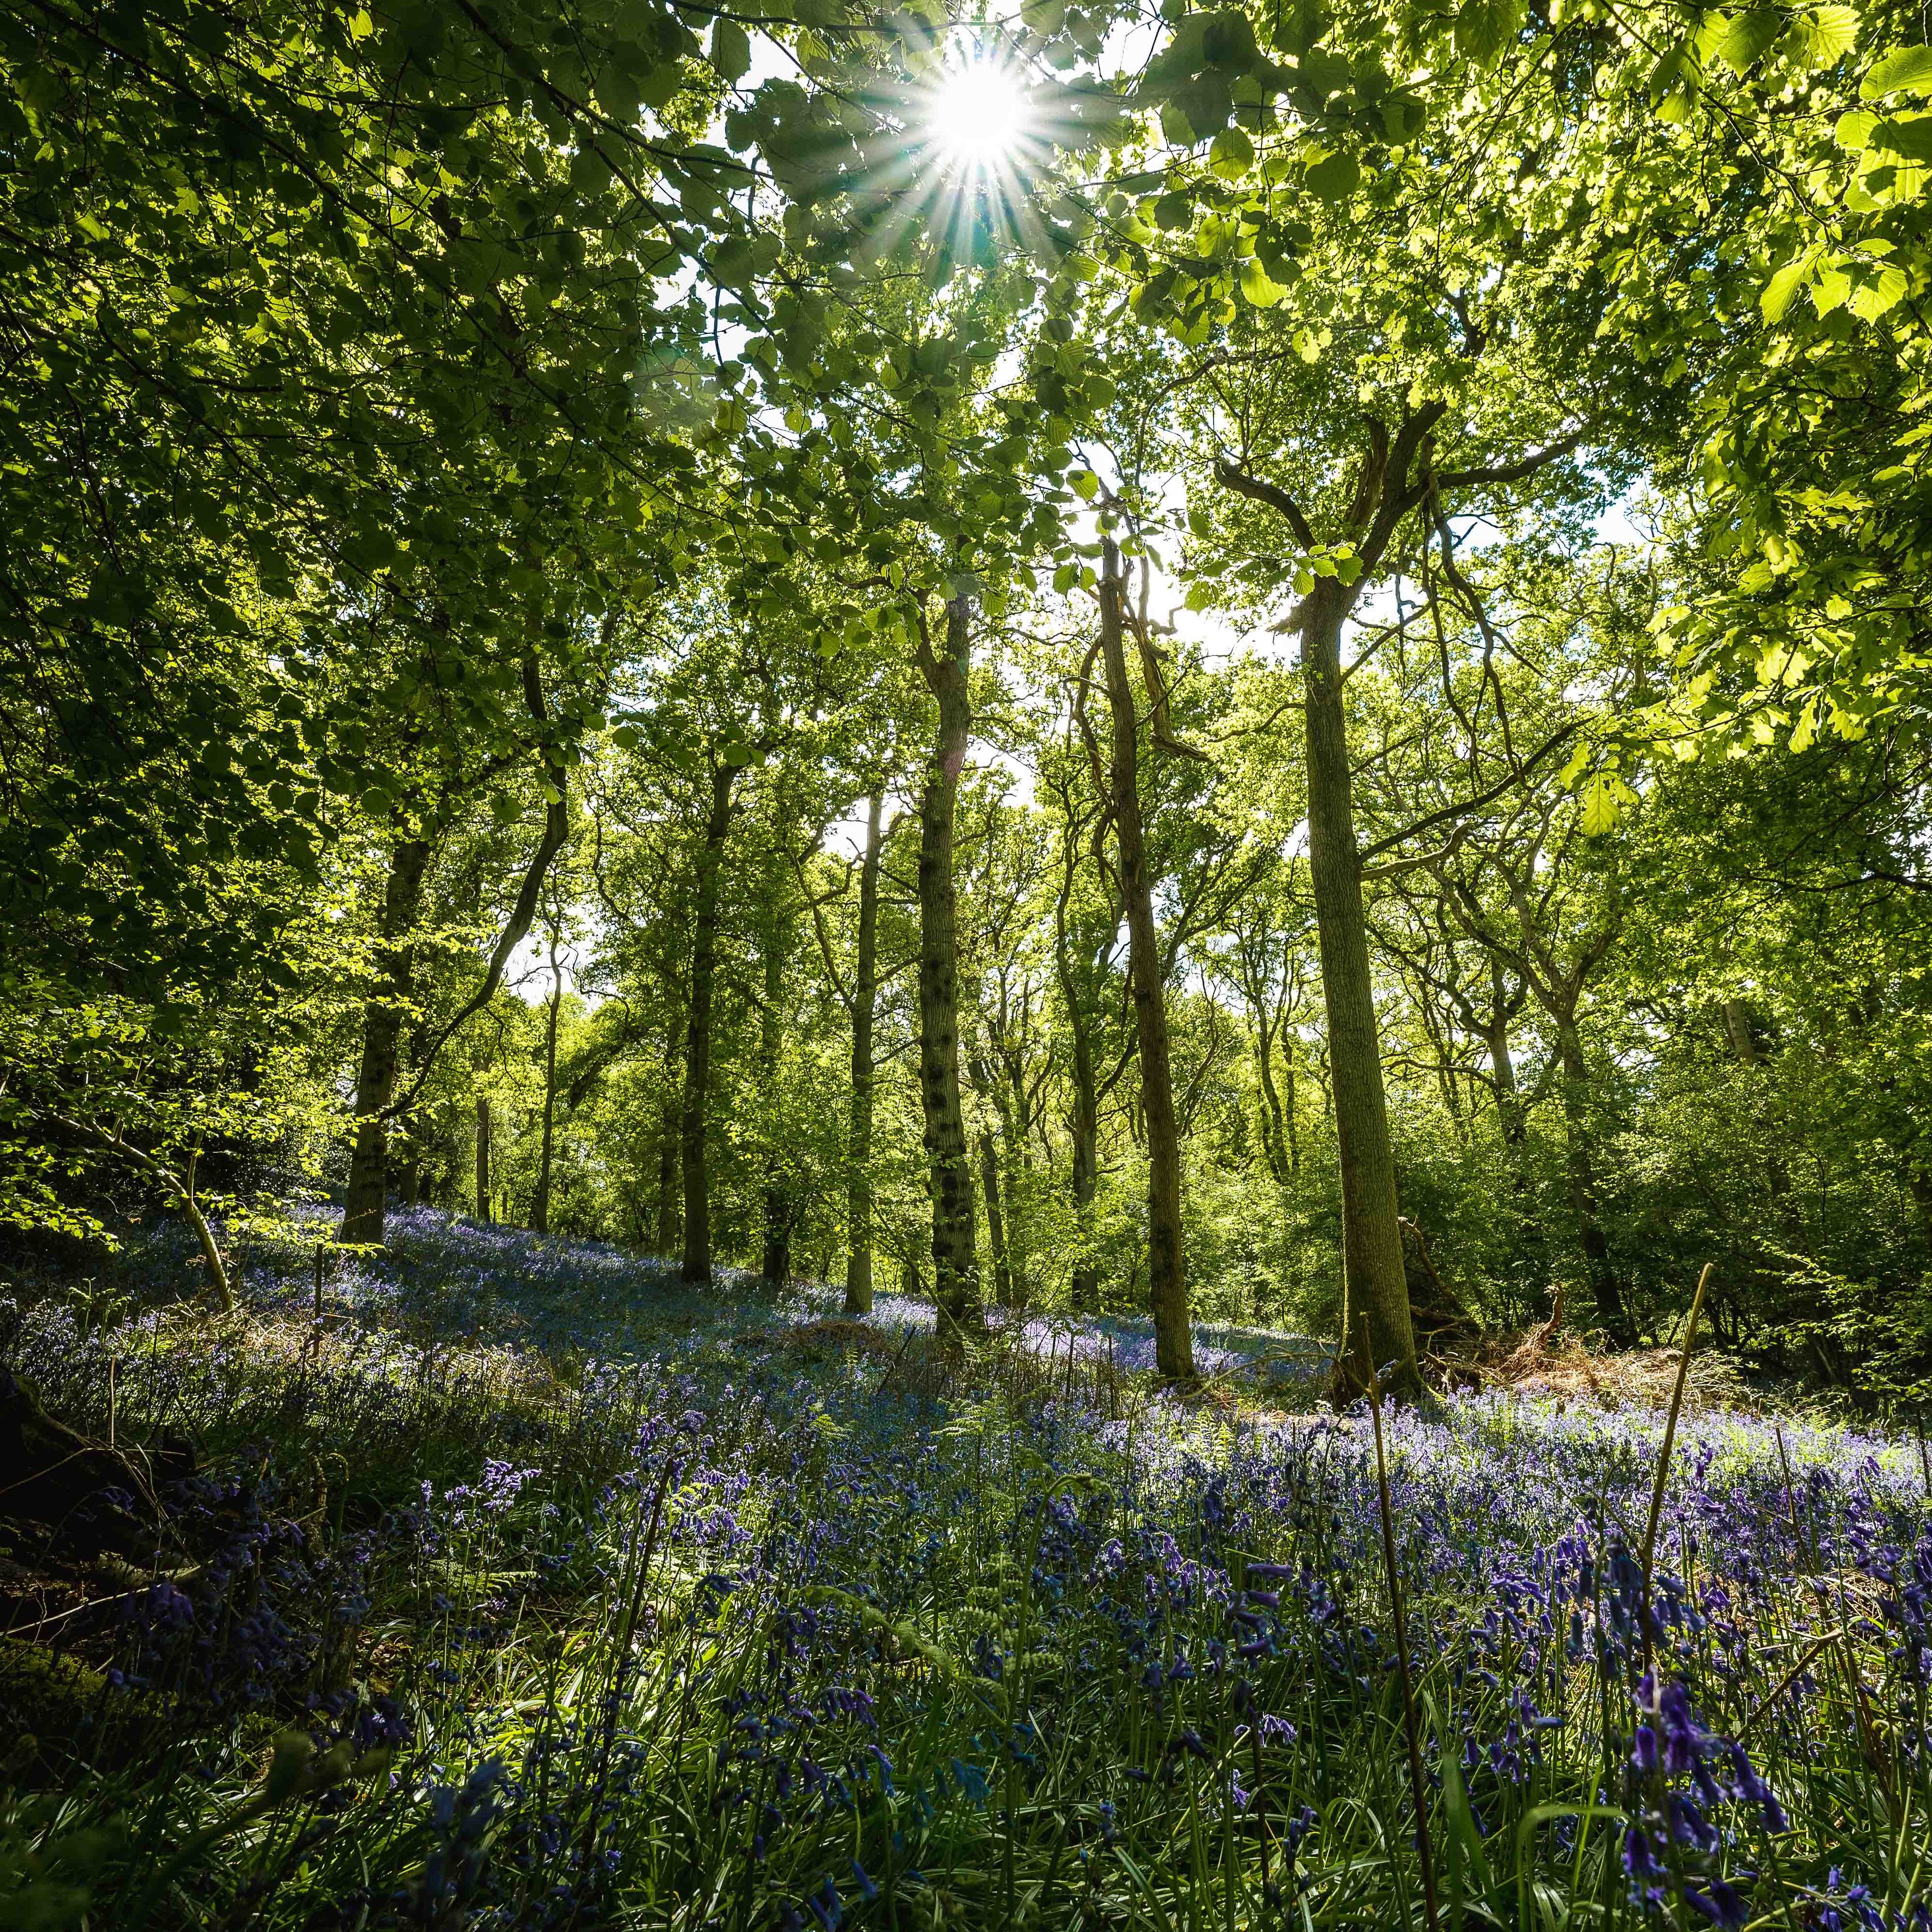 A carpet of bluebells on the forest floor with tall trees and sunshine streaming through the branches